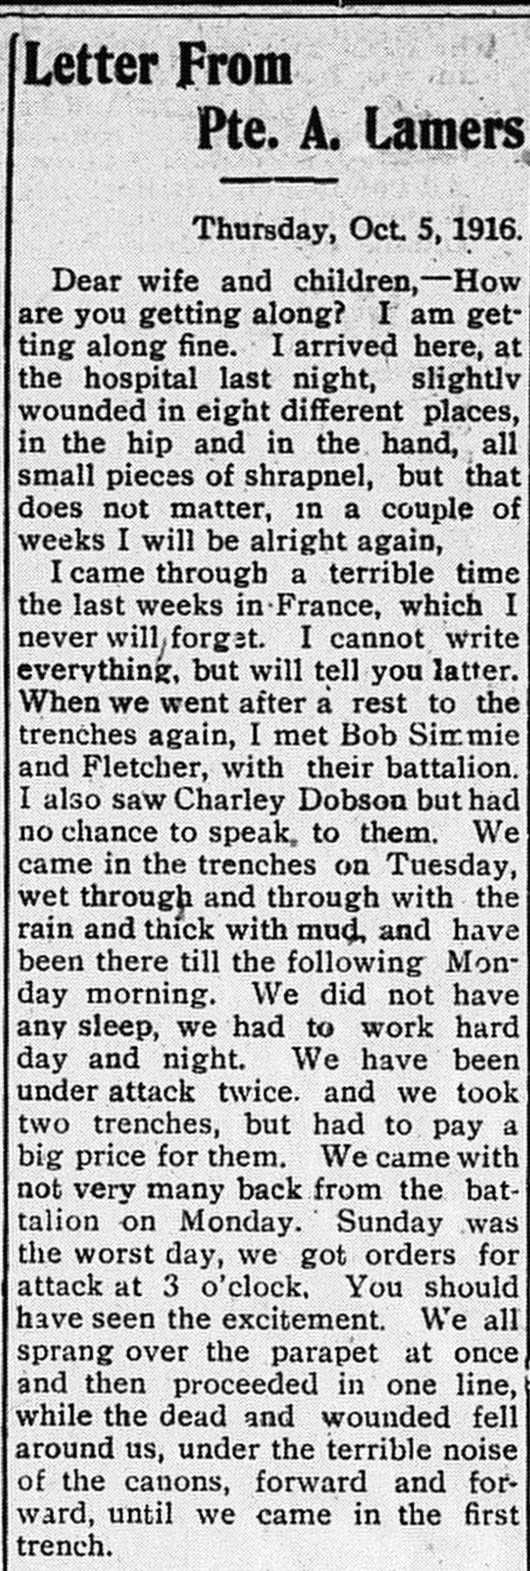 The Canadian Echo, October 25, 1916 - part 1